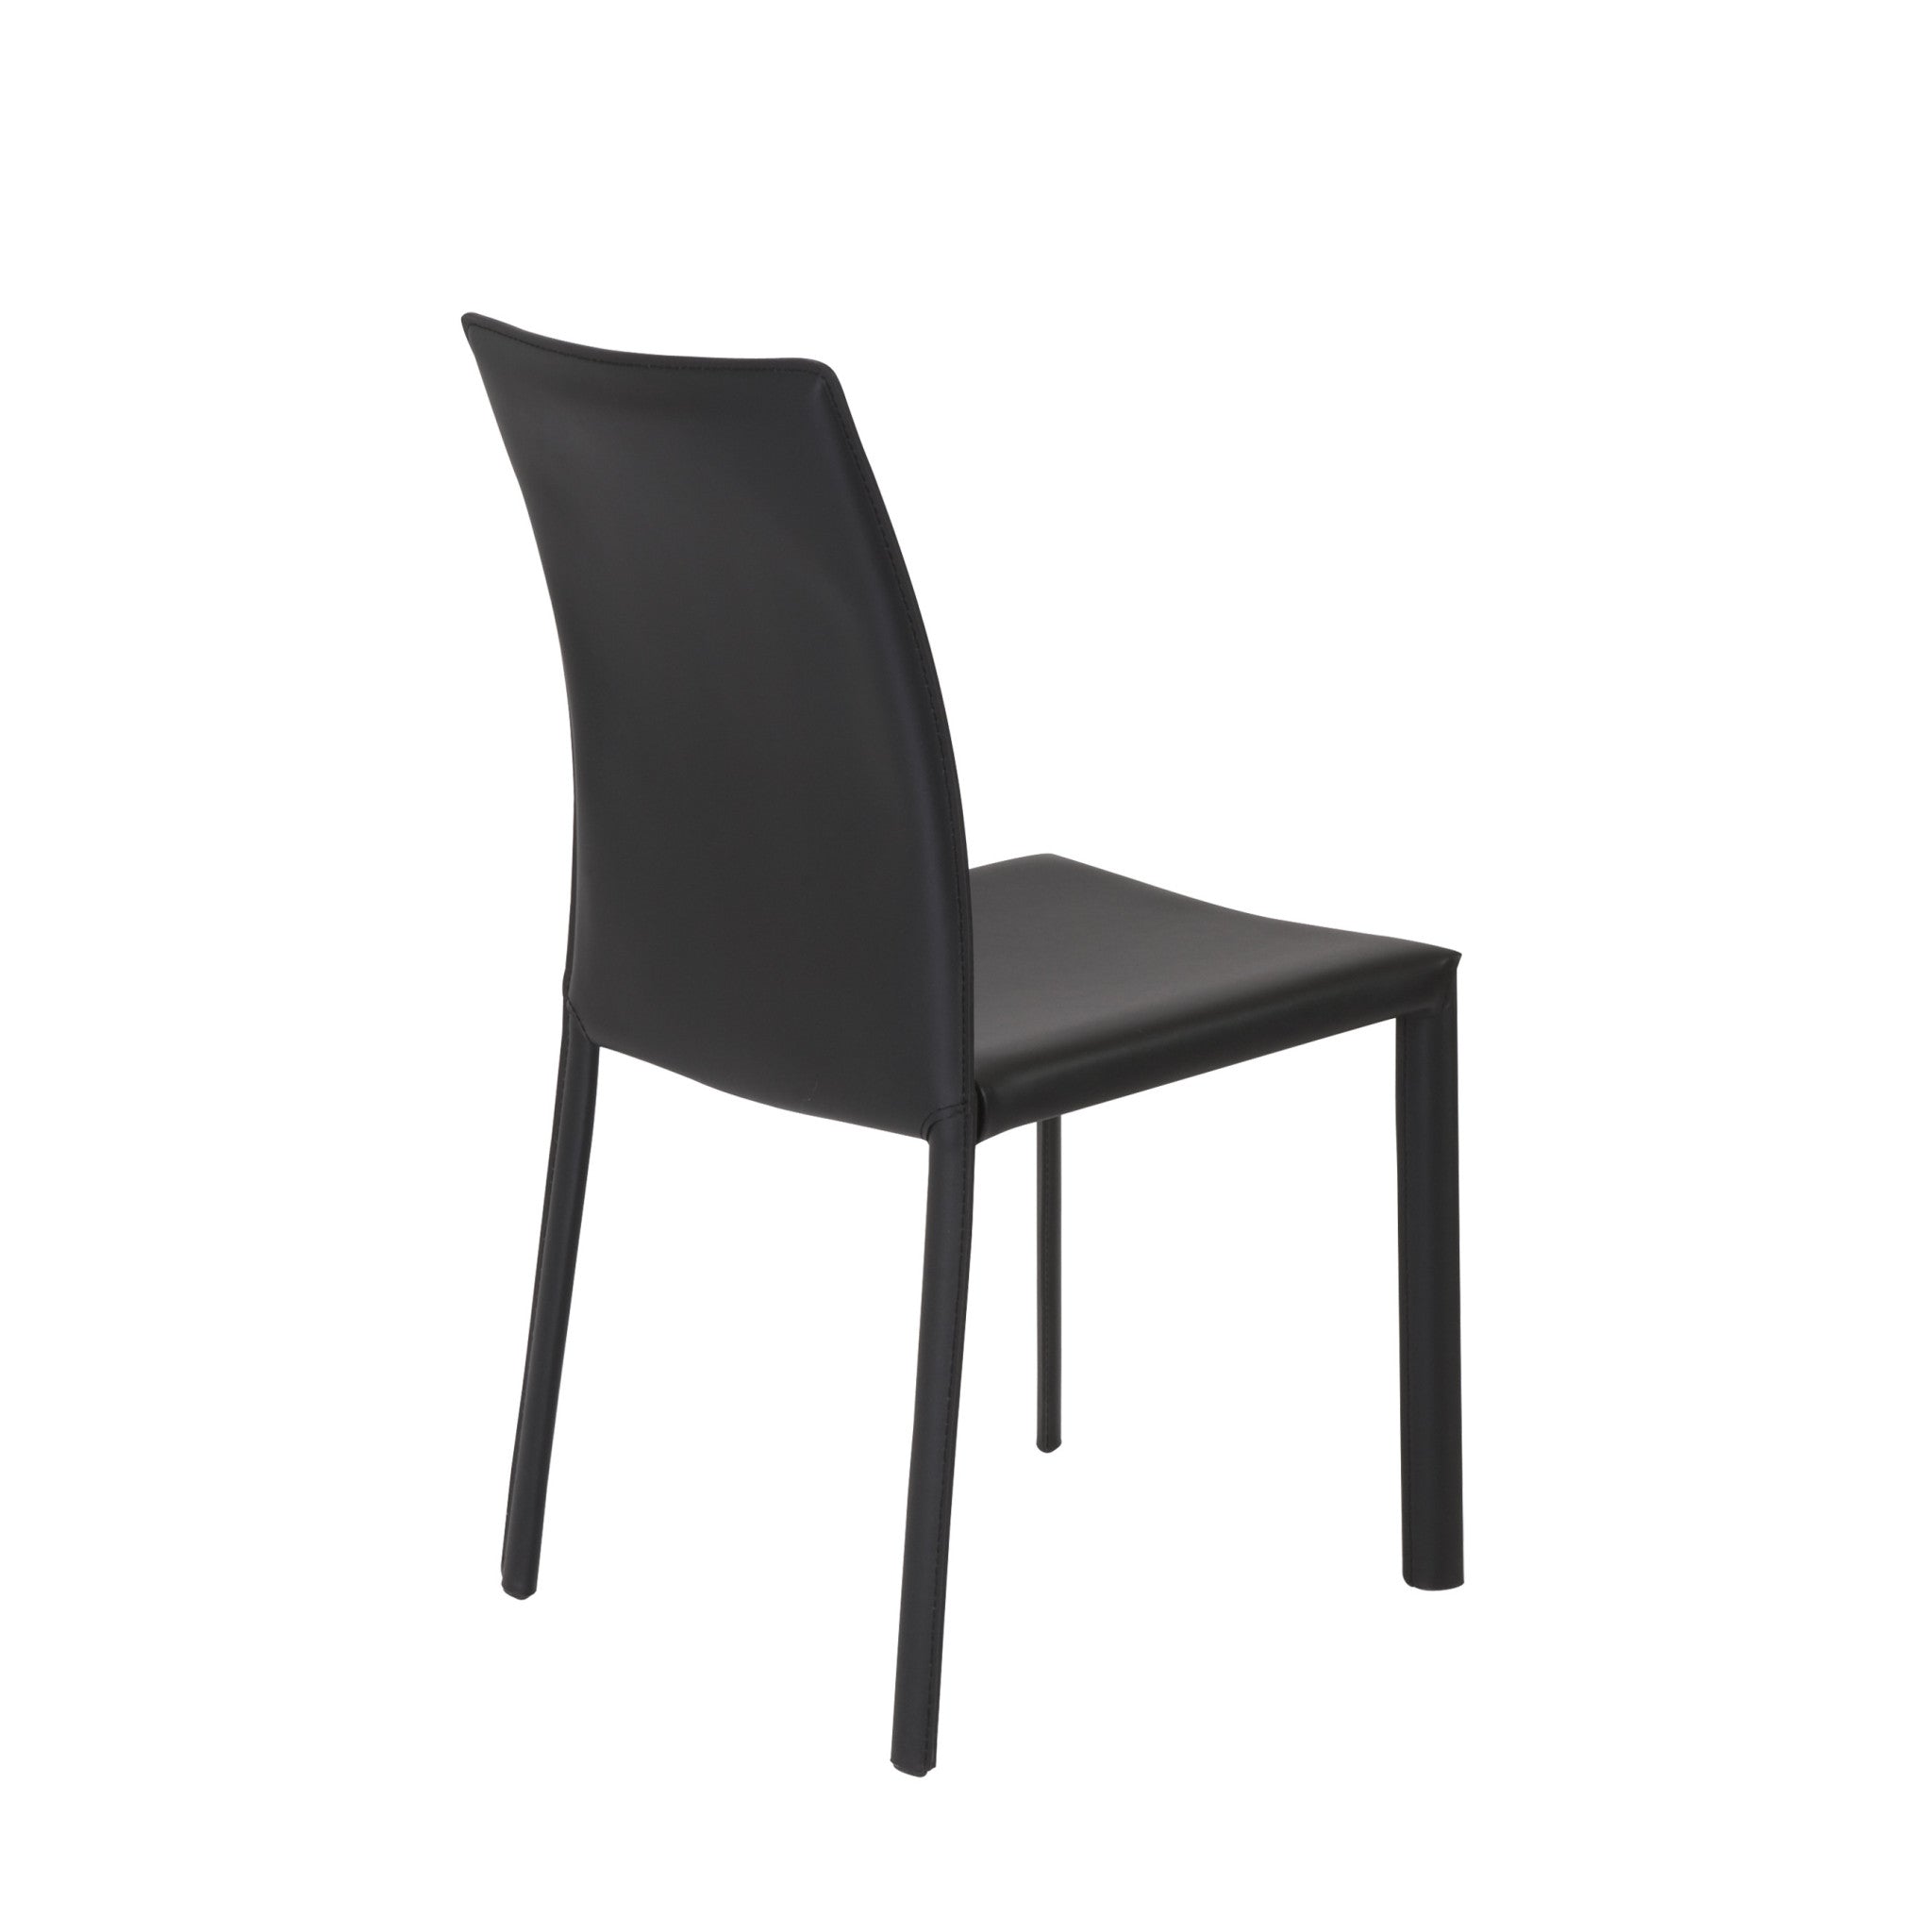 Set of Two Black Upholstered Leather Dining Side Chairs